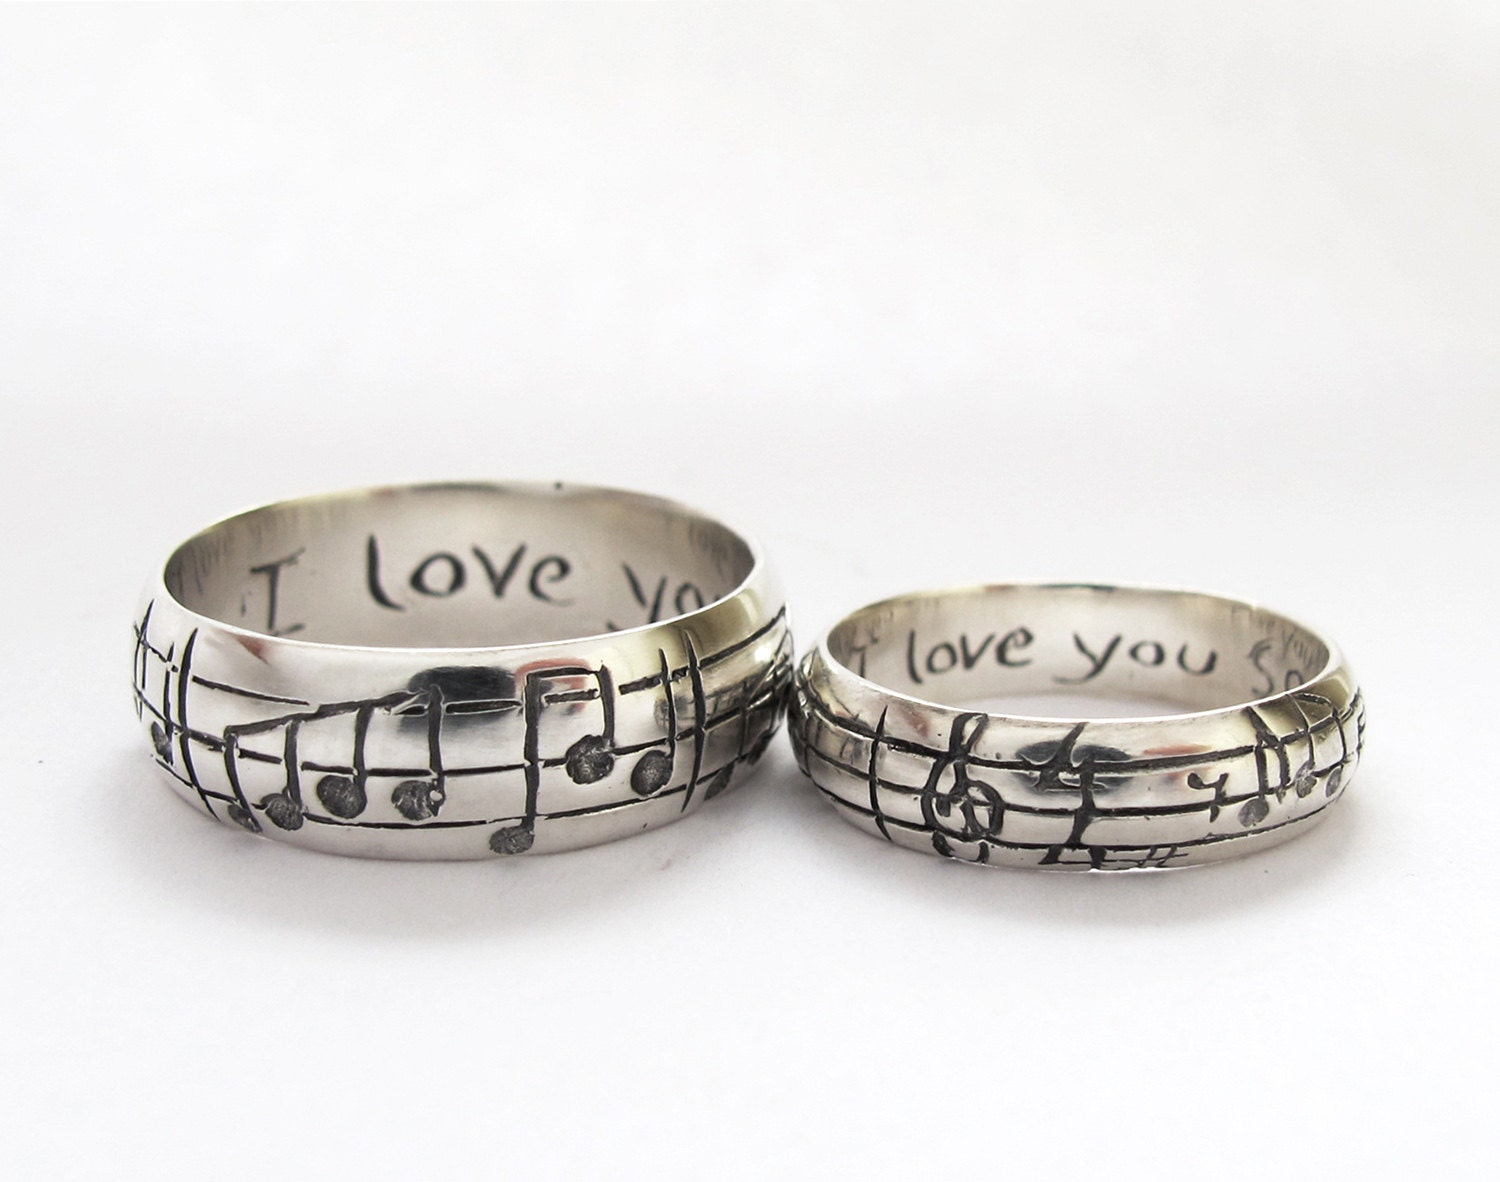 Kind Engagement Rings on Your Song Wedding Rings   Any Song   One Of A Kind   Sterling Silver